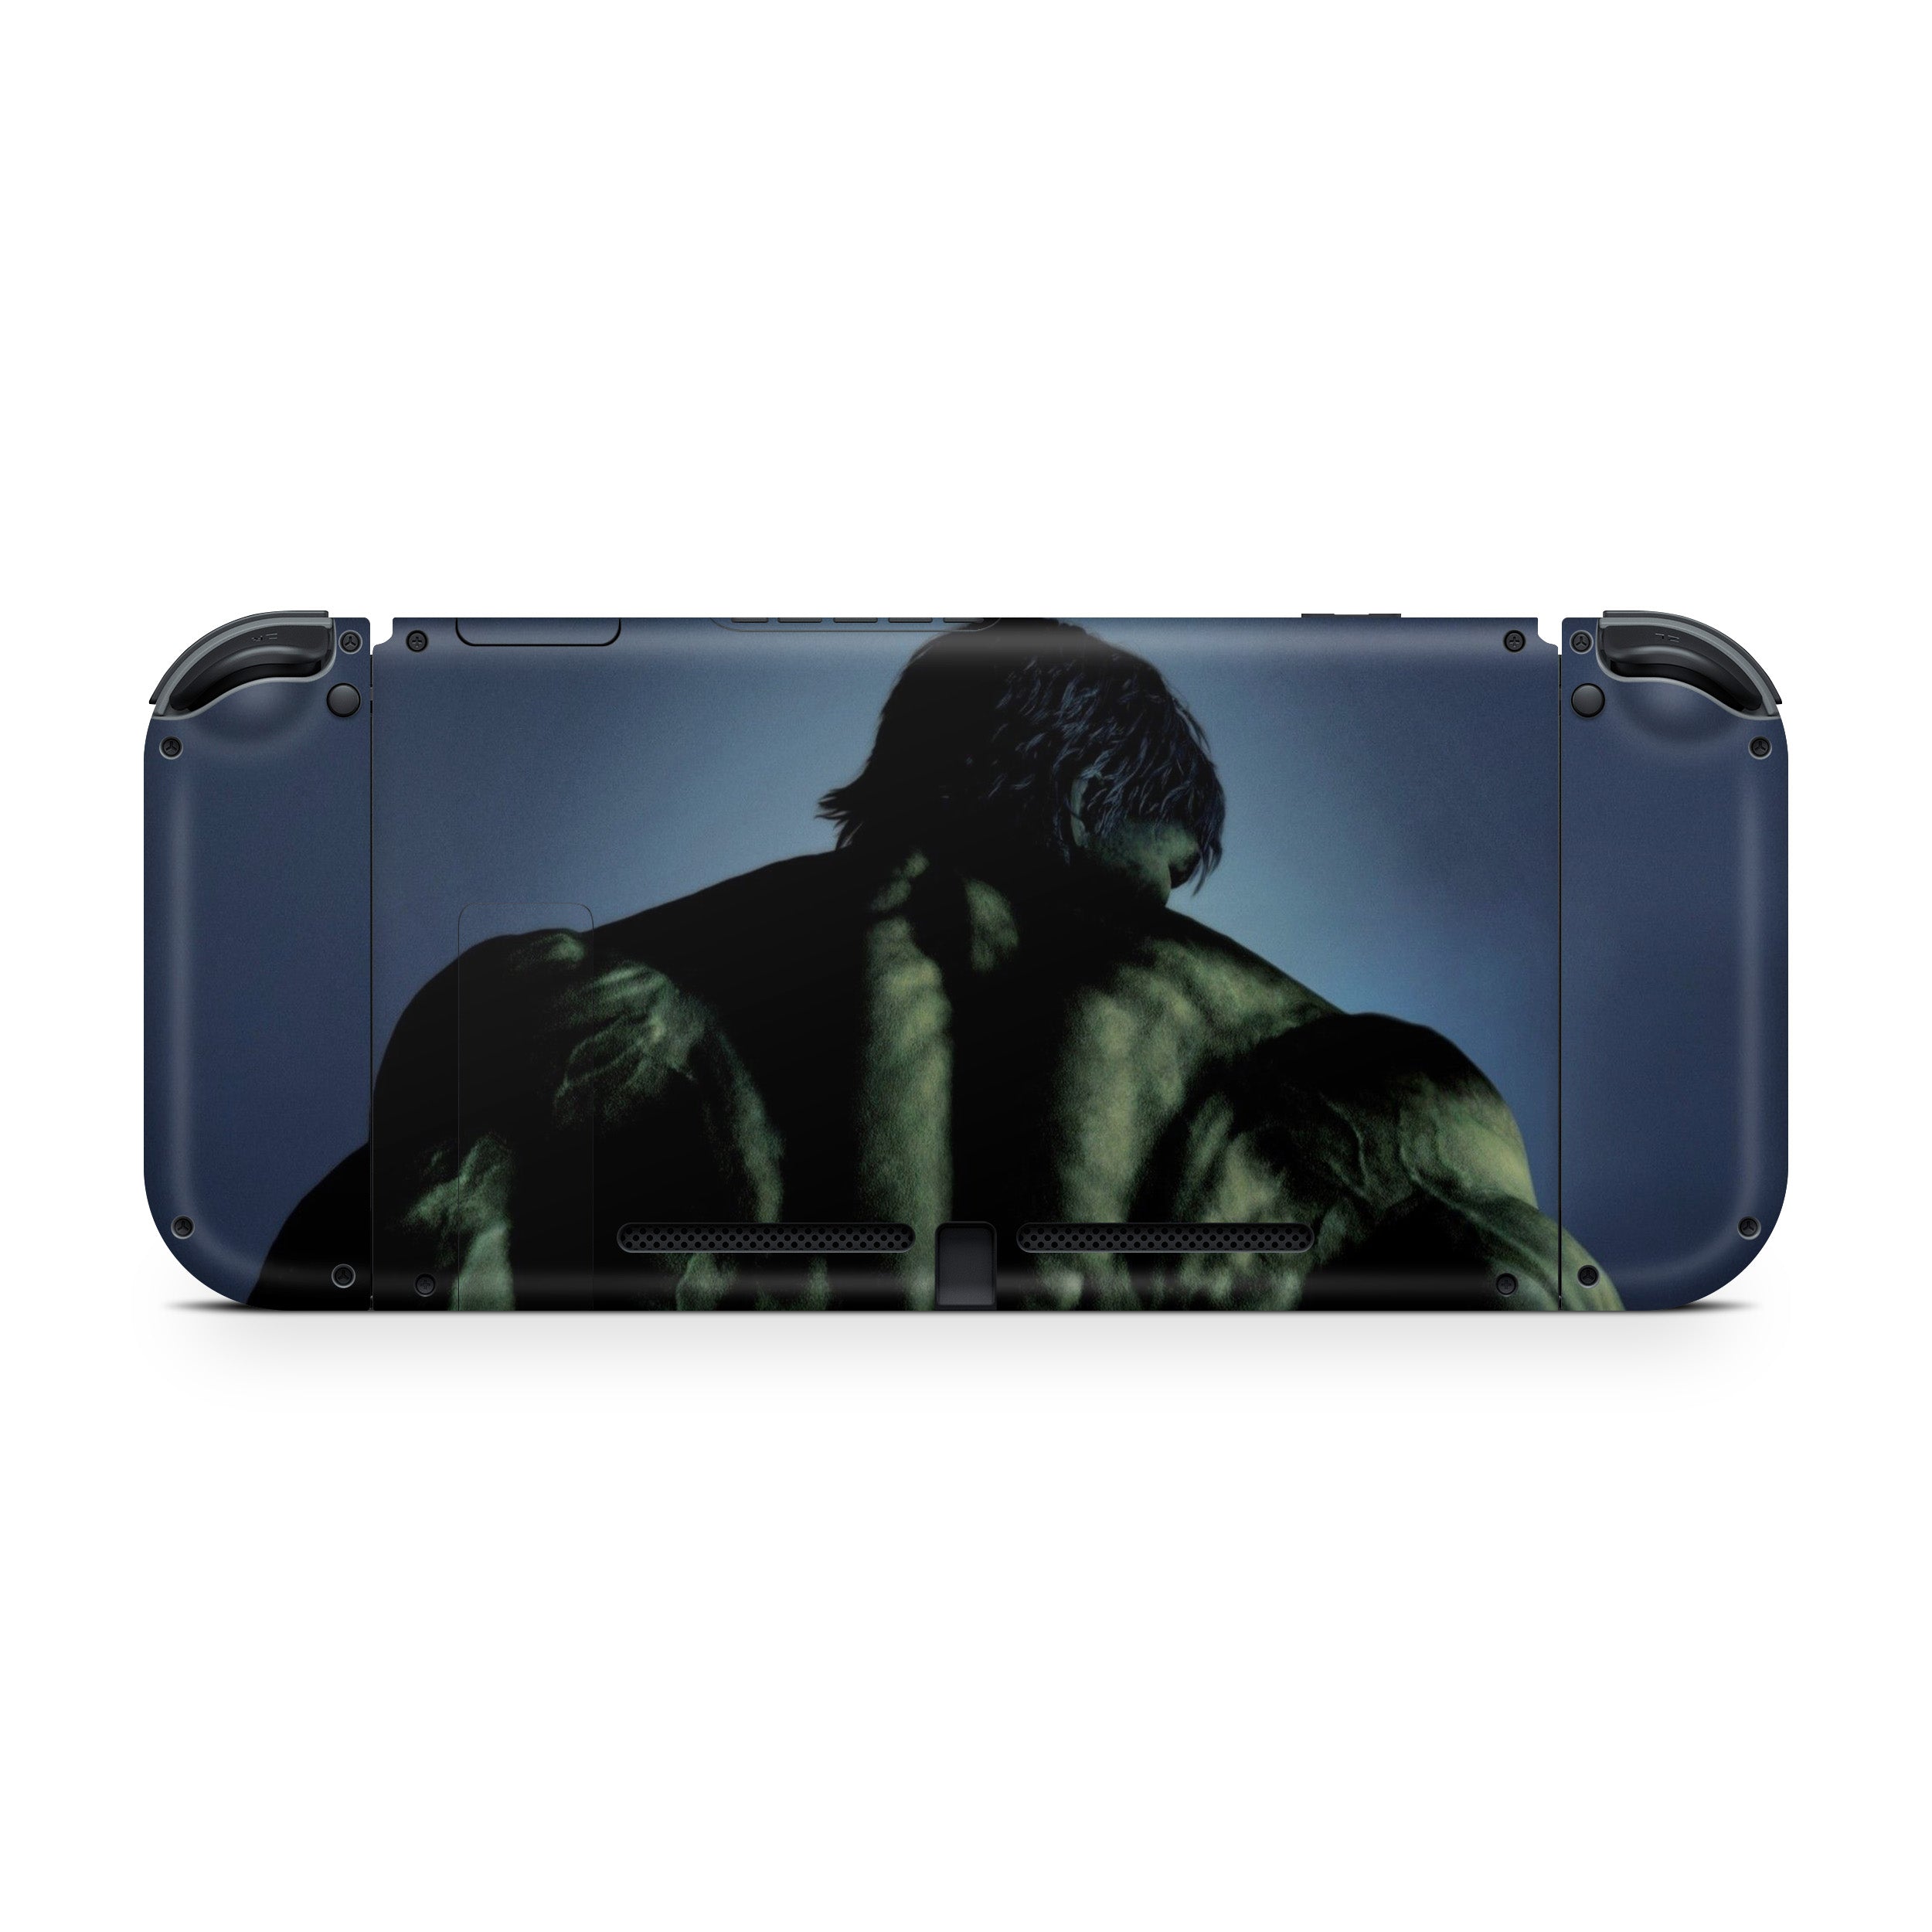 A video game skin featuring a Marvel Hulk design for the Nintendo Switch.